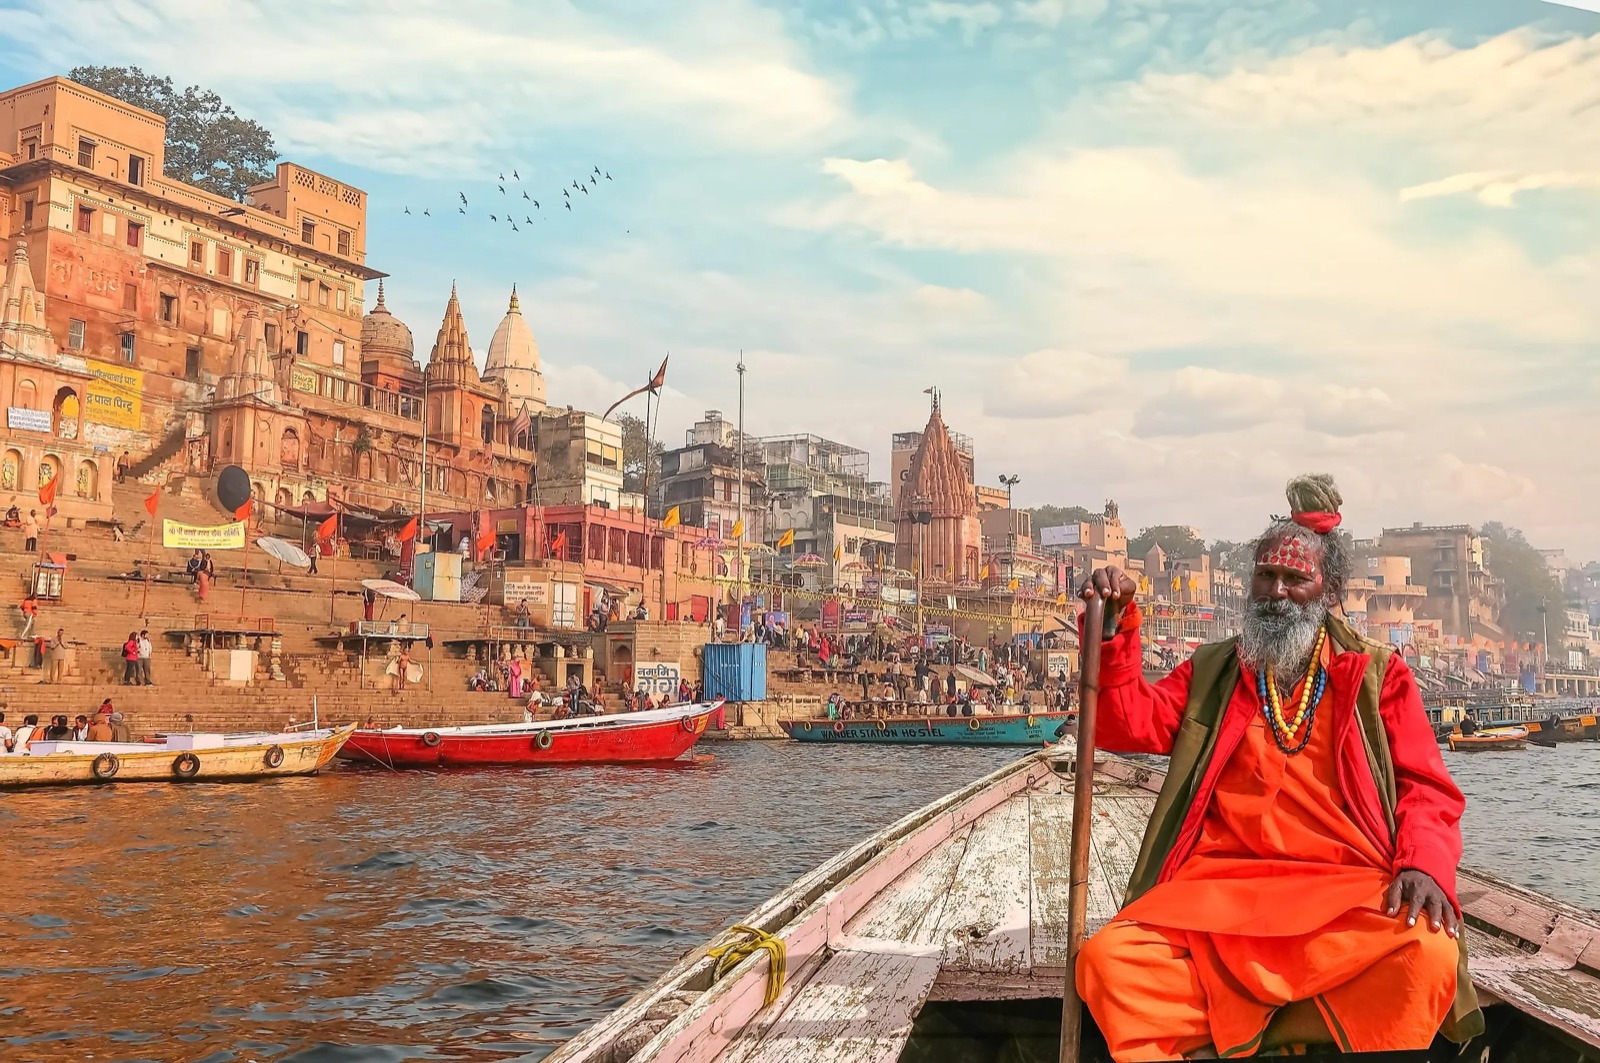 It’s That Easy — Get More Than 17/25 on This Geography Test to Win Ganges river, Varanasi, India